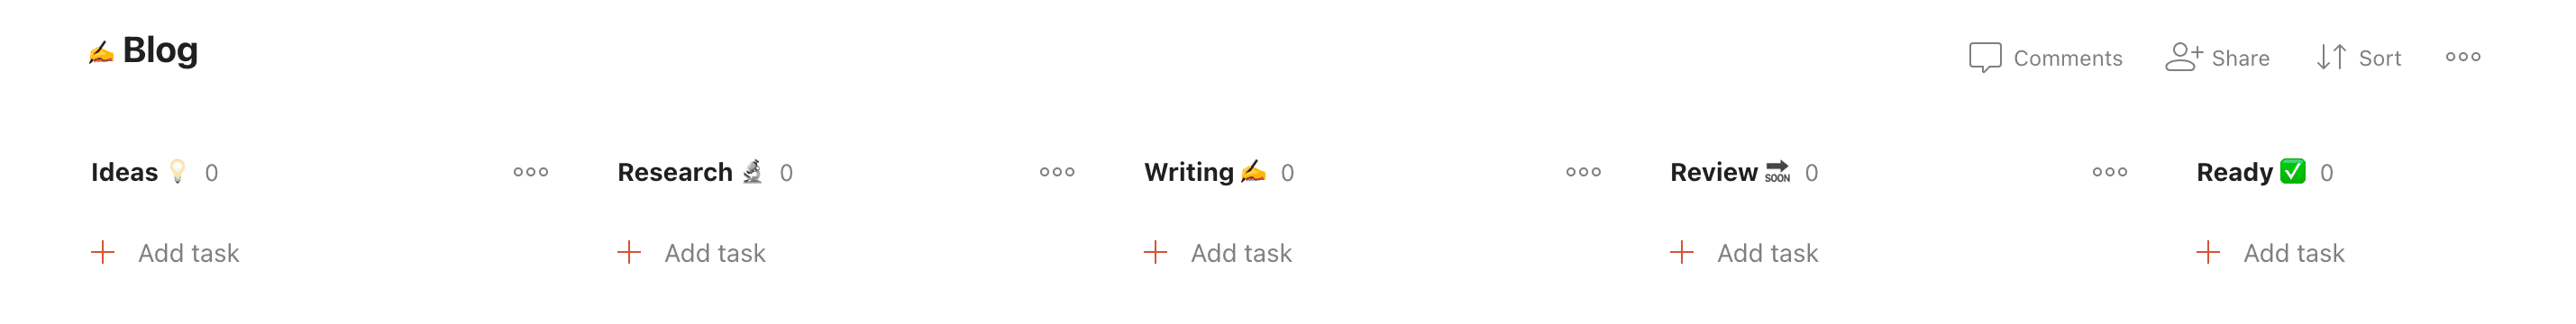 my todoist setup for project management